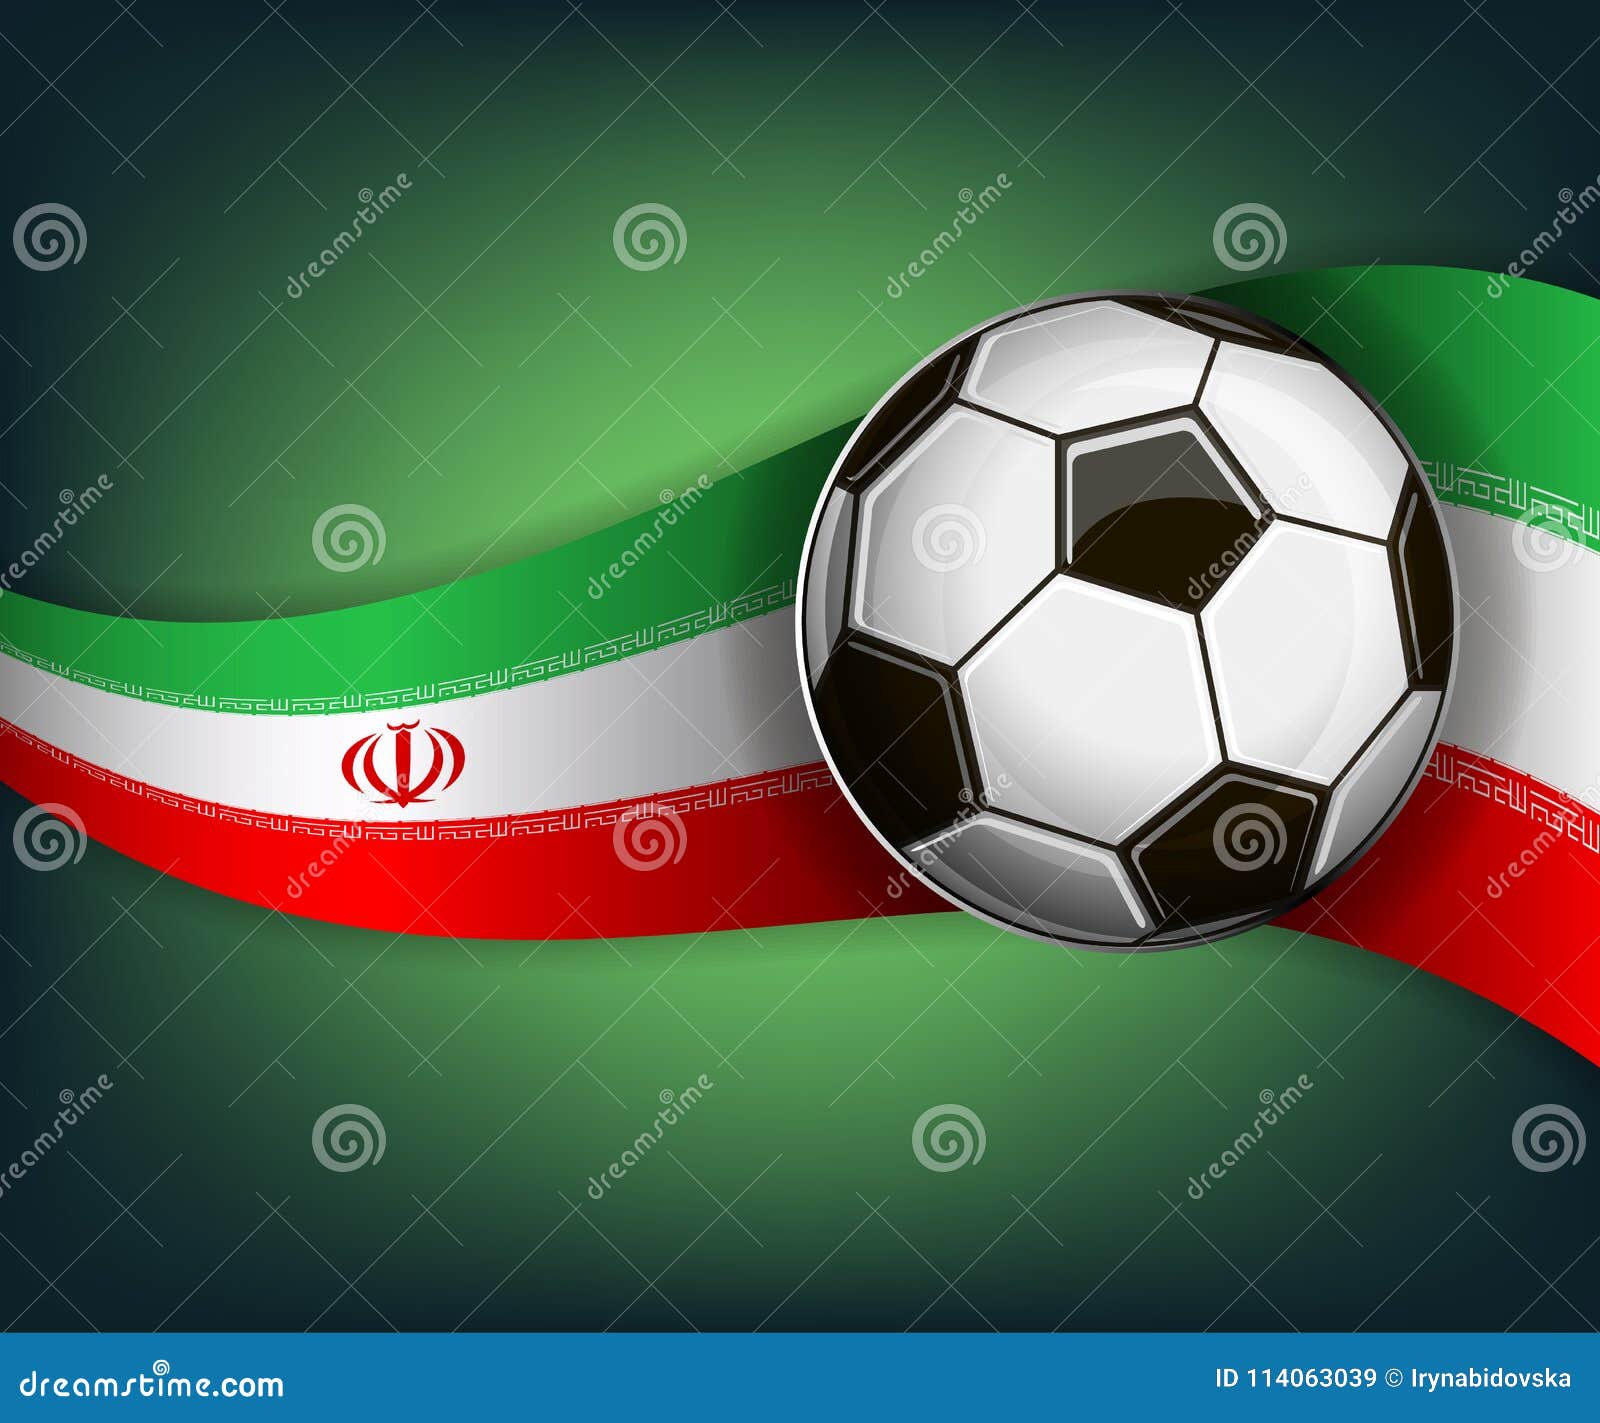 Illustration with Football or Soccer Ball and Flag of Iran Stock Vector ...